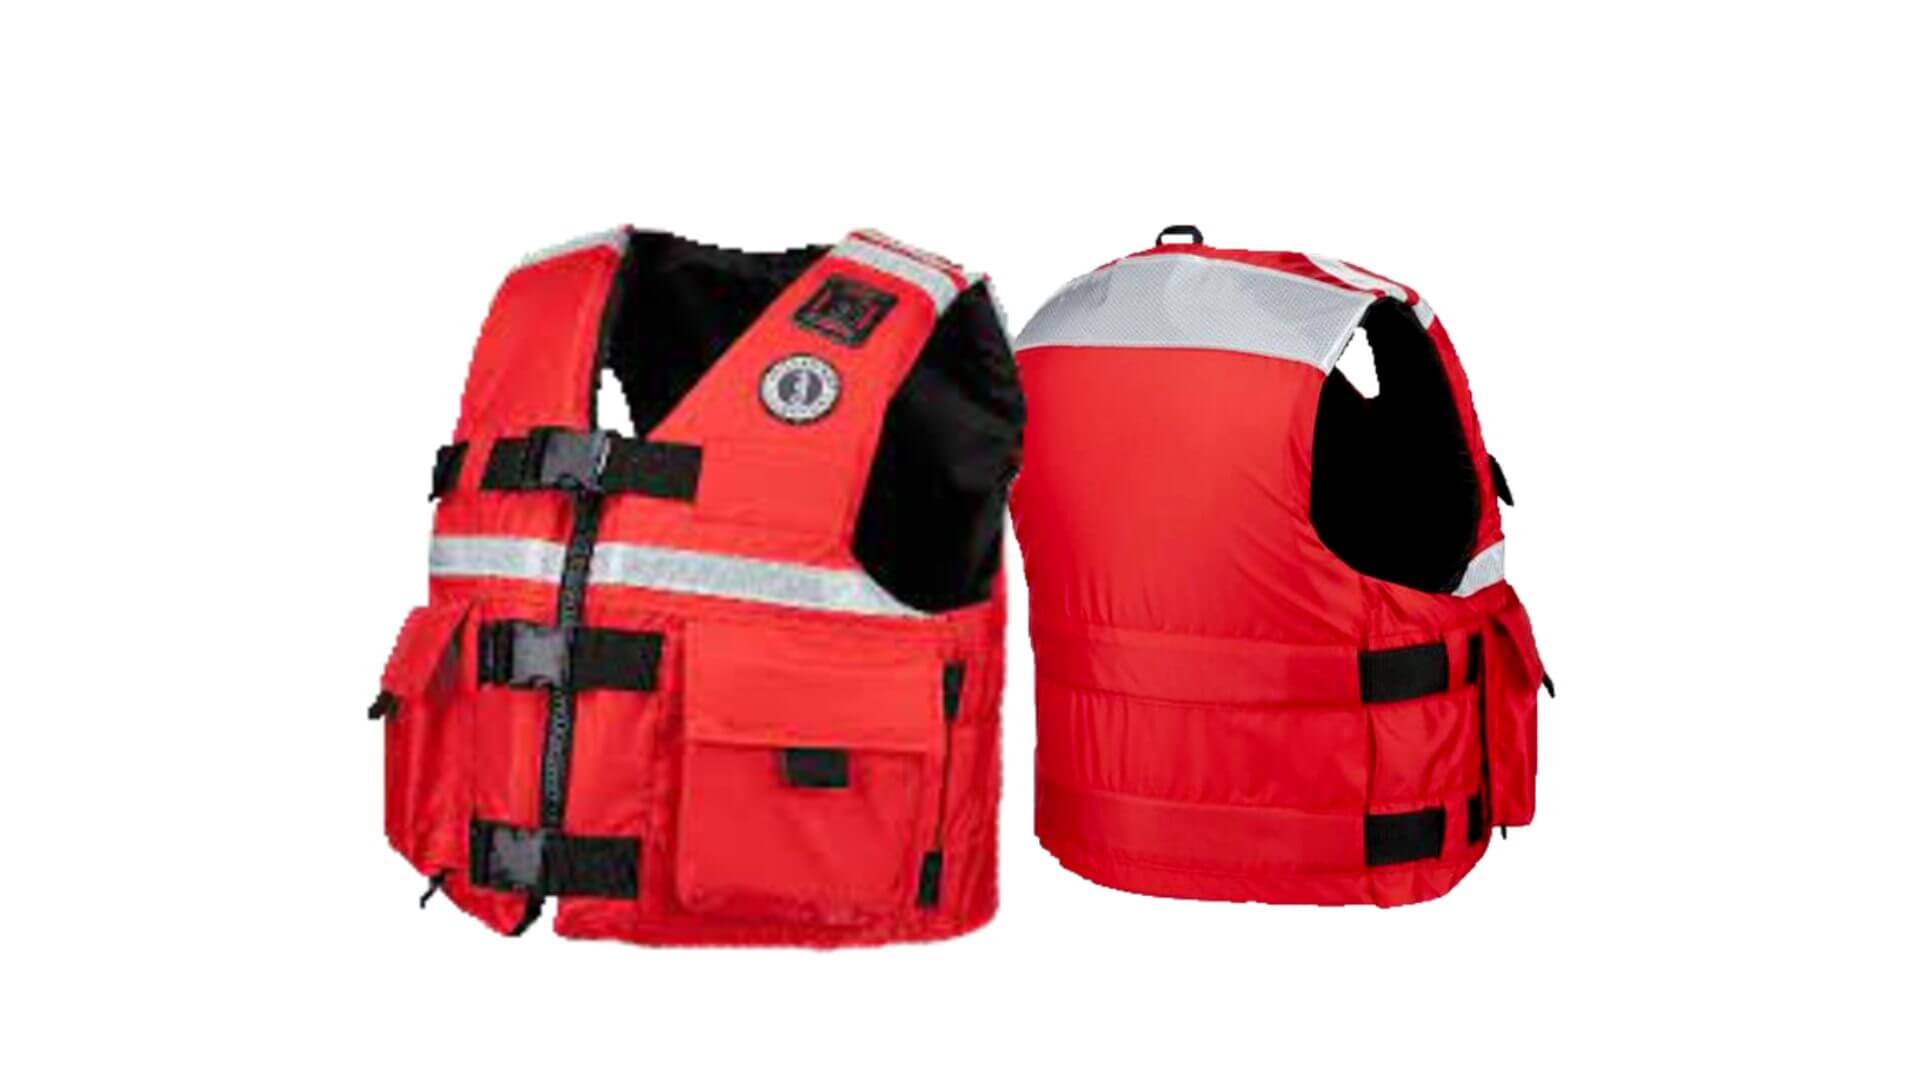 Mustang Survival - SAR Vest with SOLAS Reflective Tape Product Review